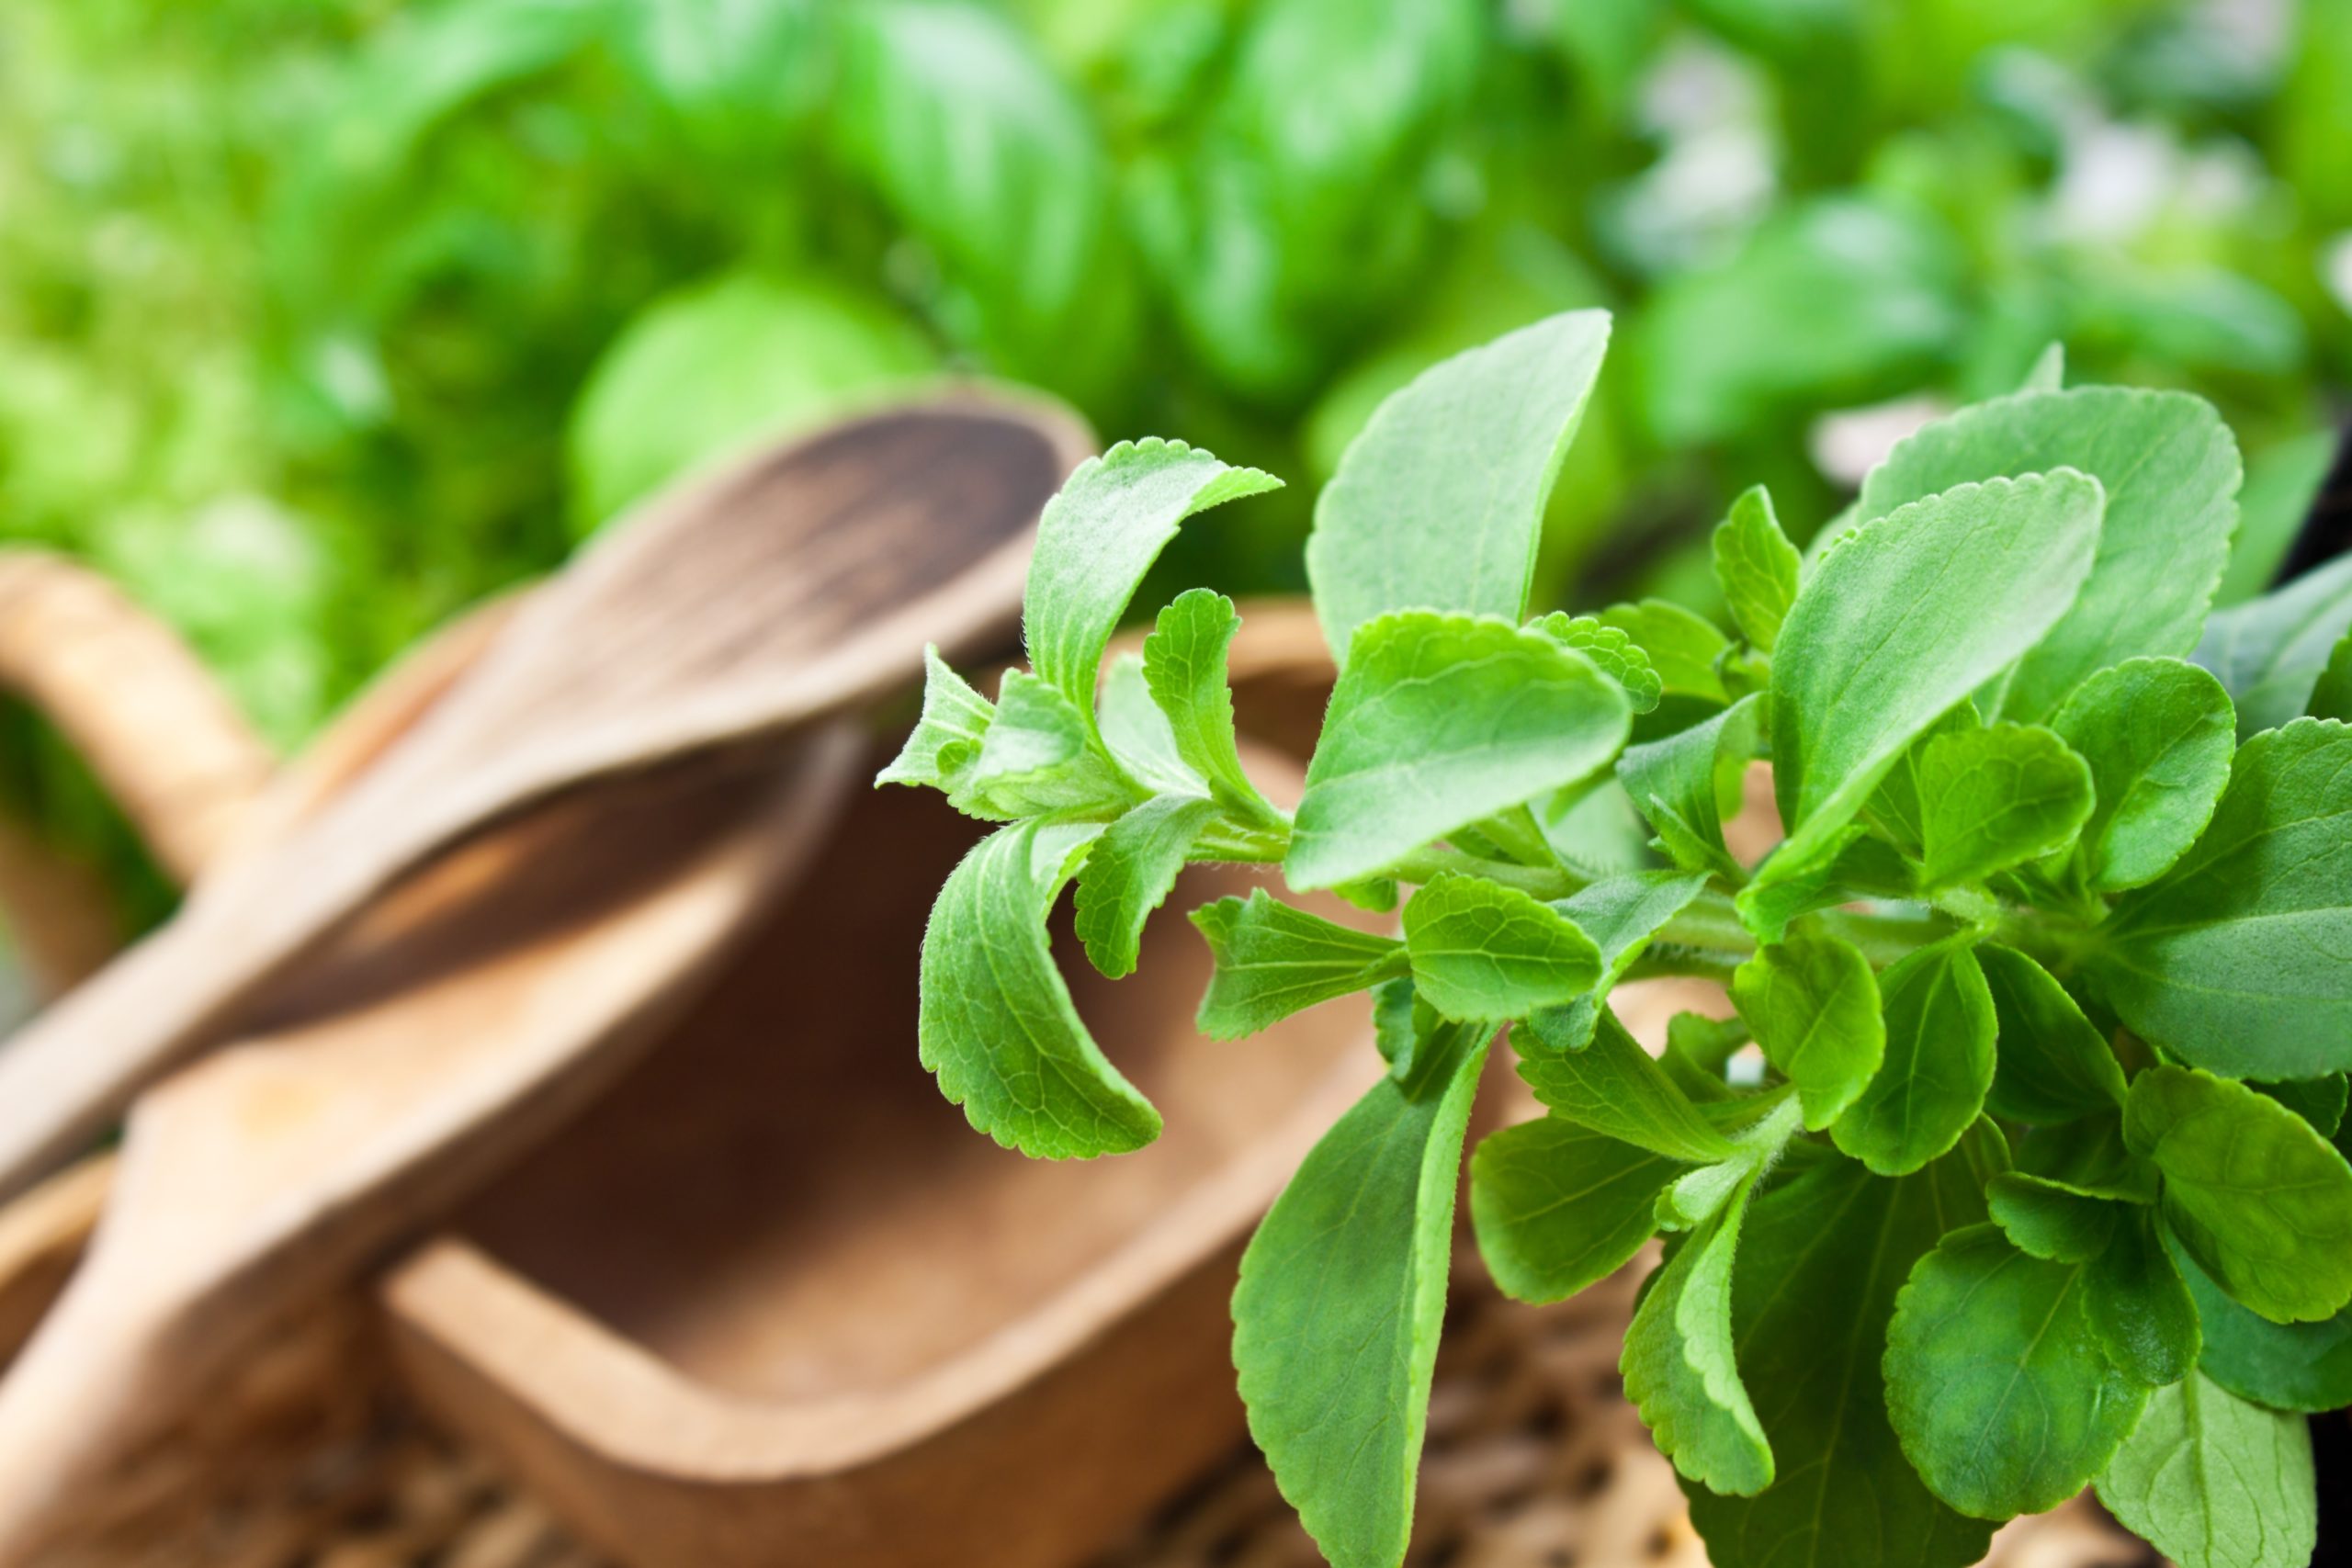 Stevia Extract vs. Stevia Leaves: What's the Difference